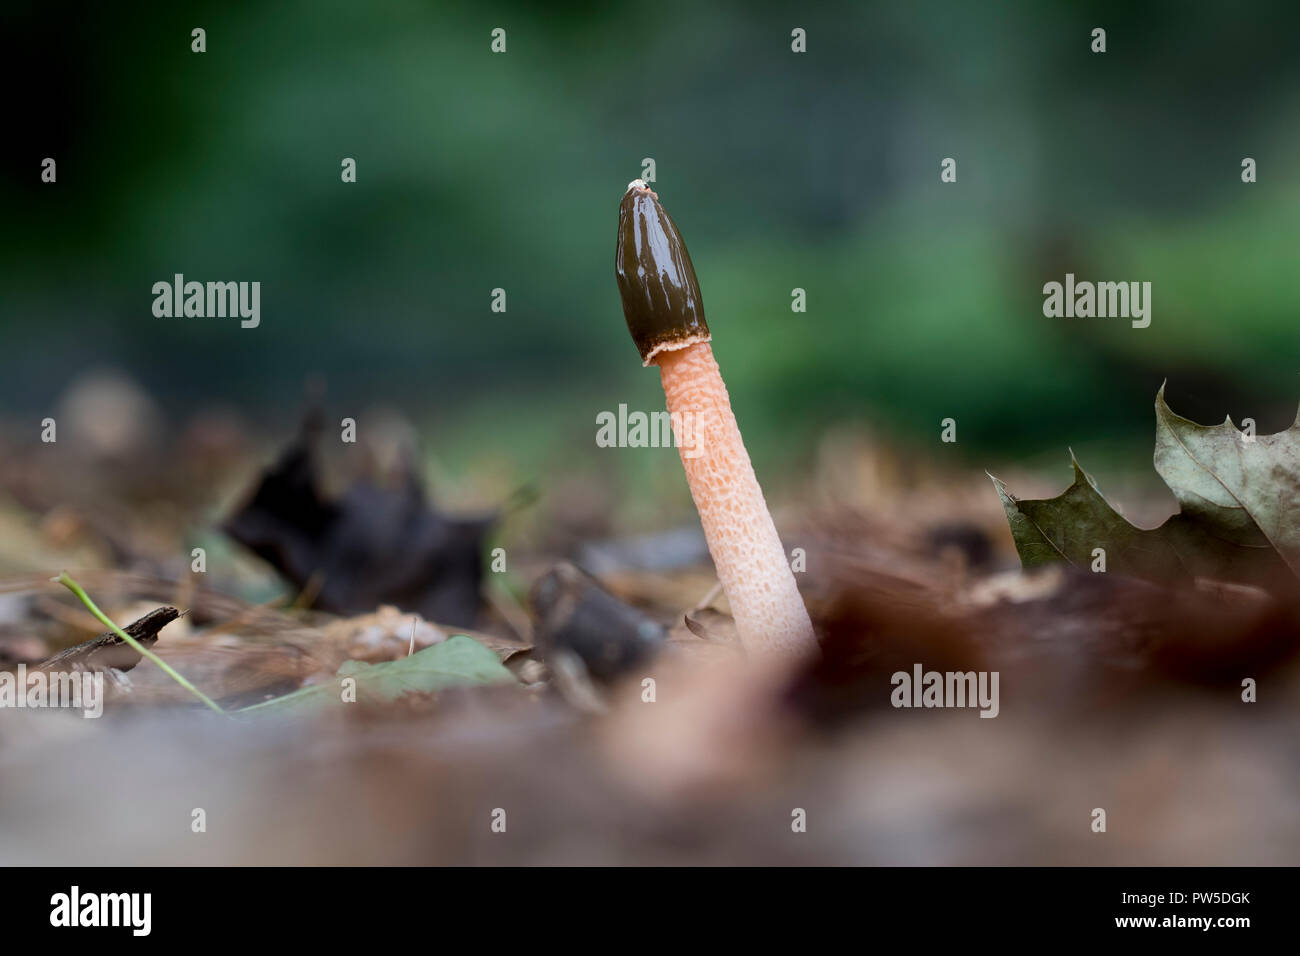 Stinkhorn fungus growing from the forest floor. Close up of mushroom fruiting during the autumn season. Stock Photo